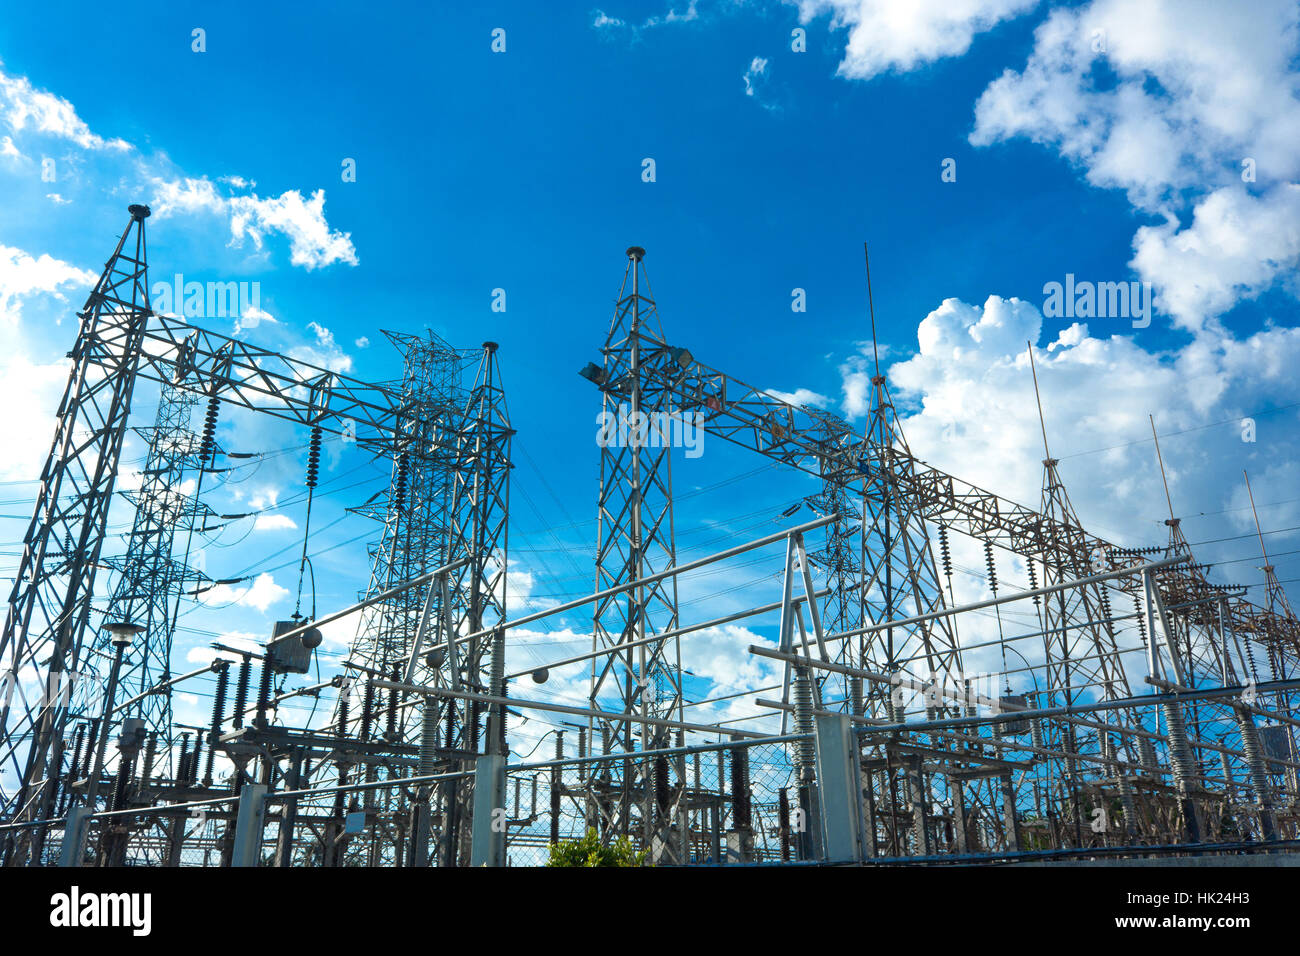 Electrical Power Plant At Day Stock Photo